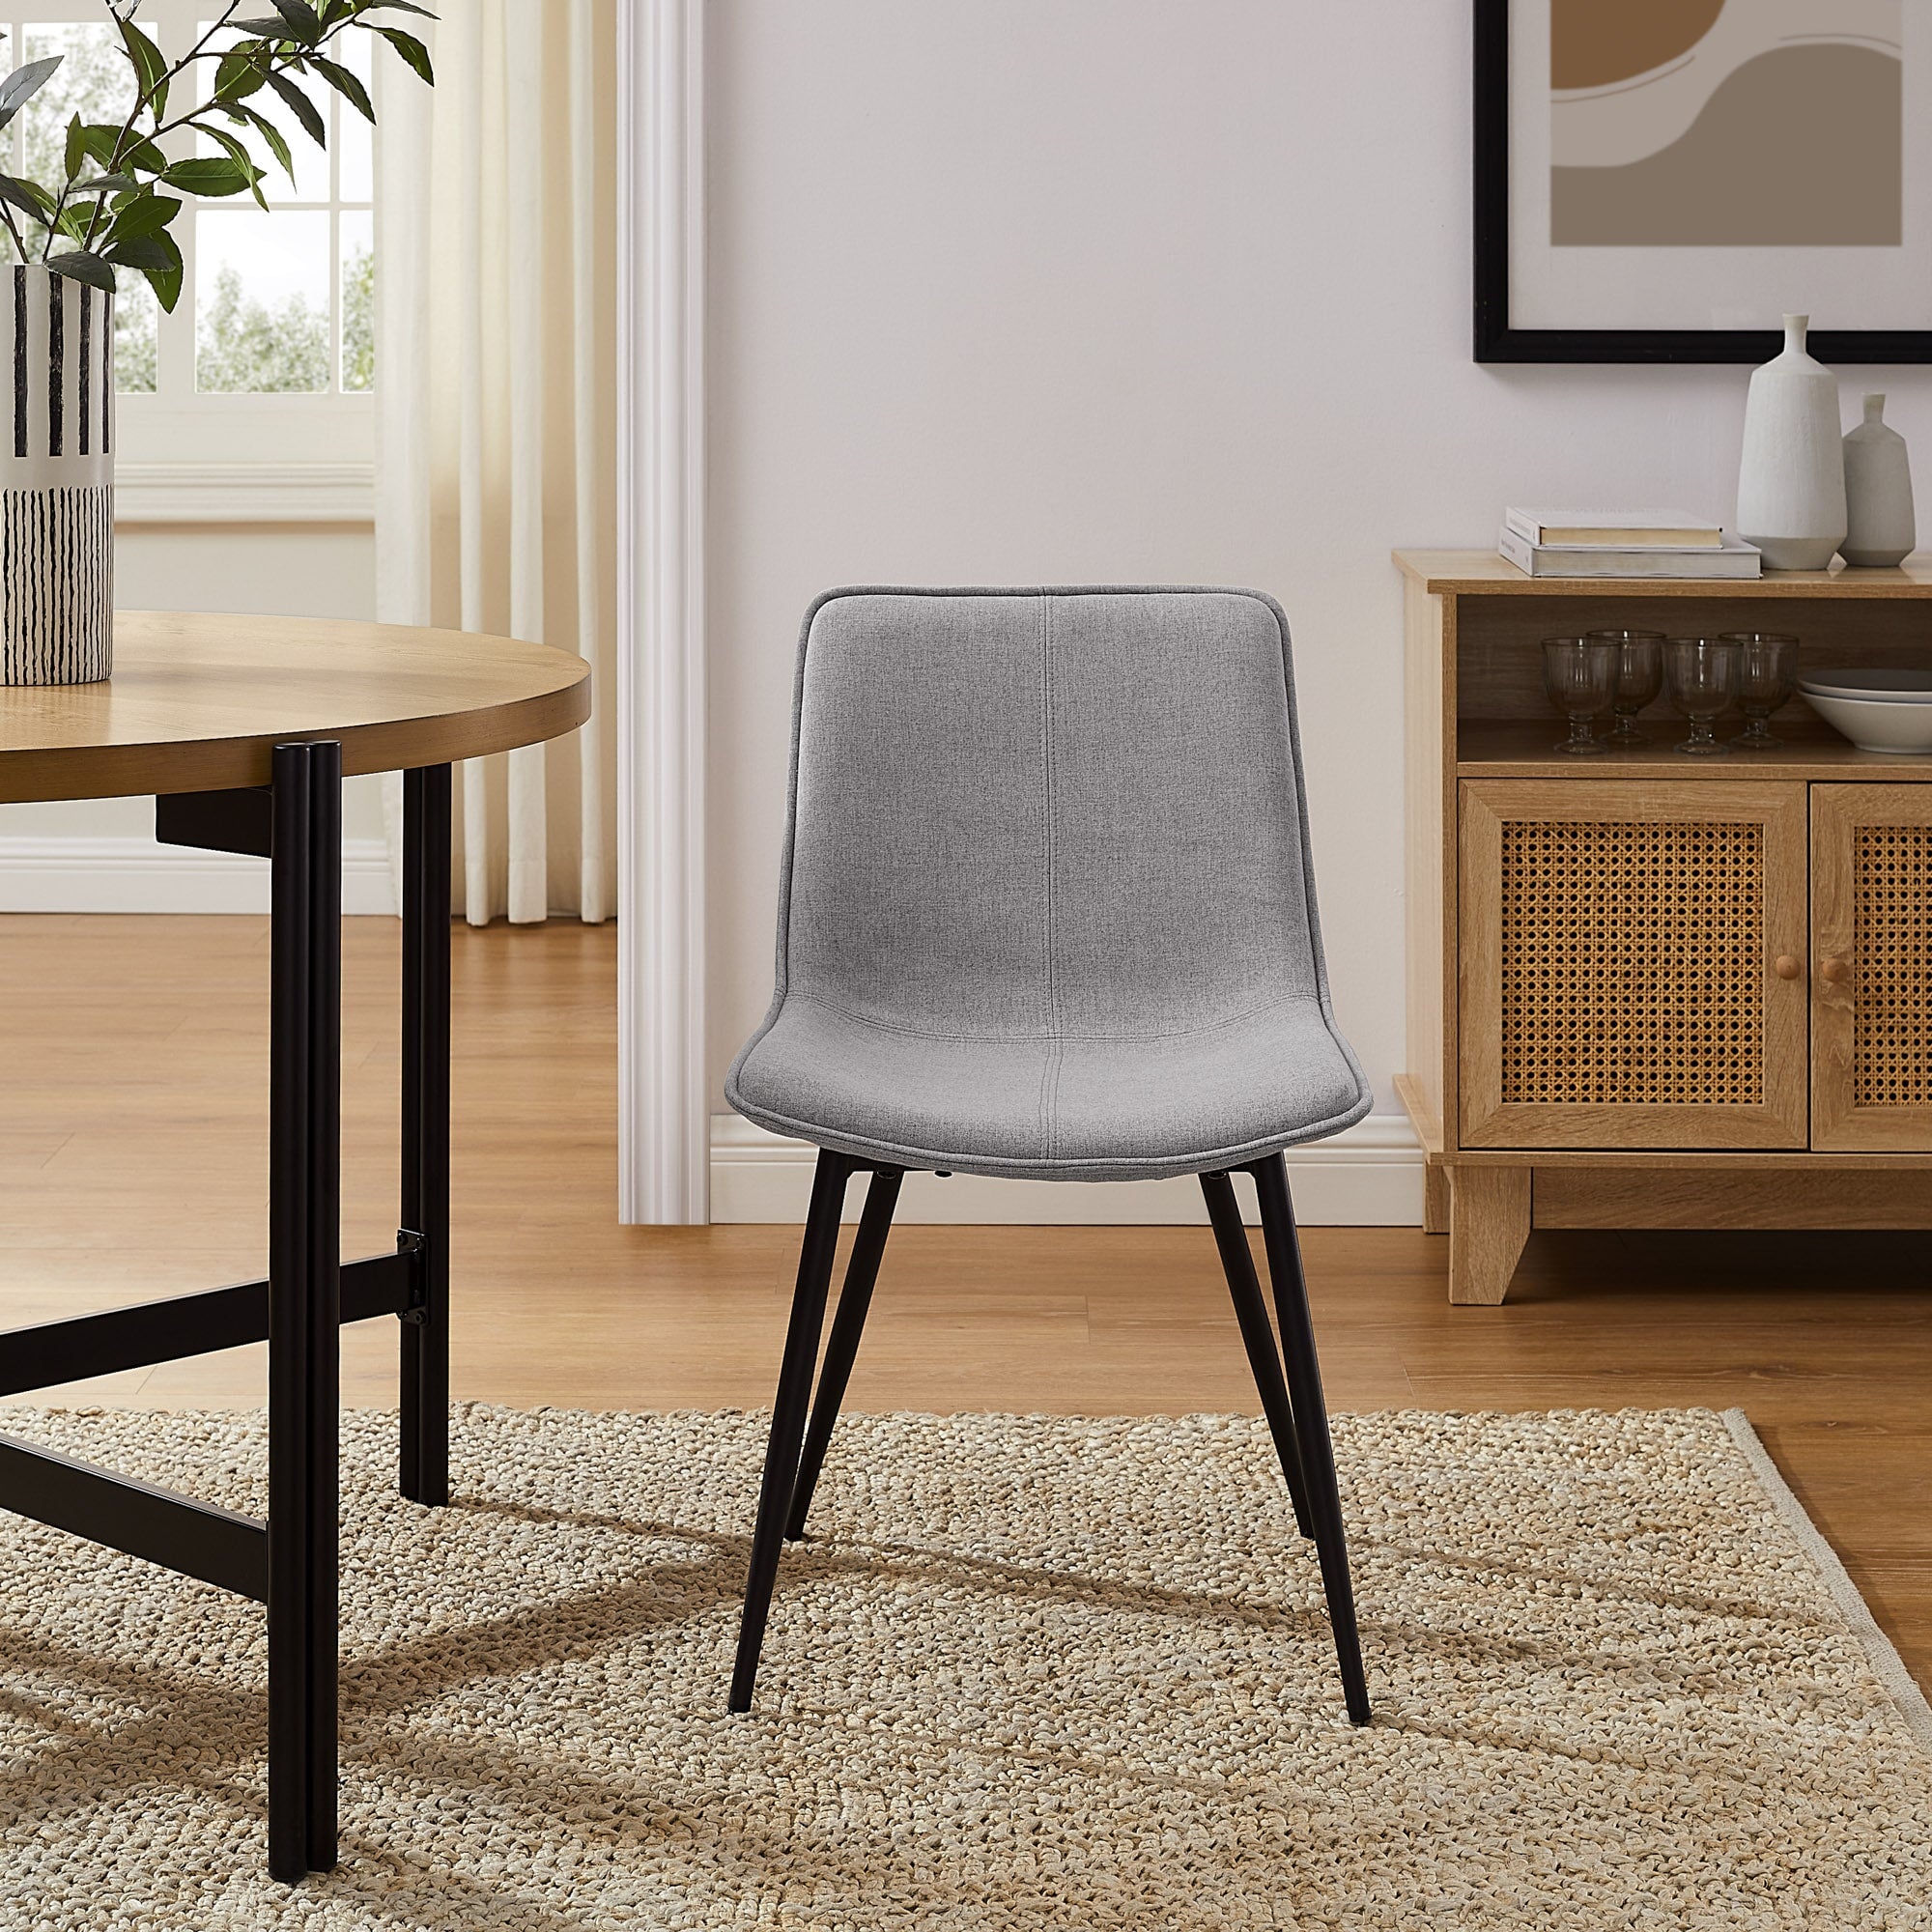 Tribeca Upholstered Dining Chair, Set of 2